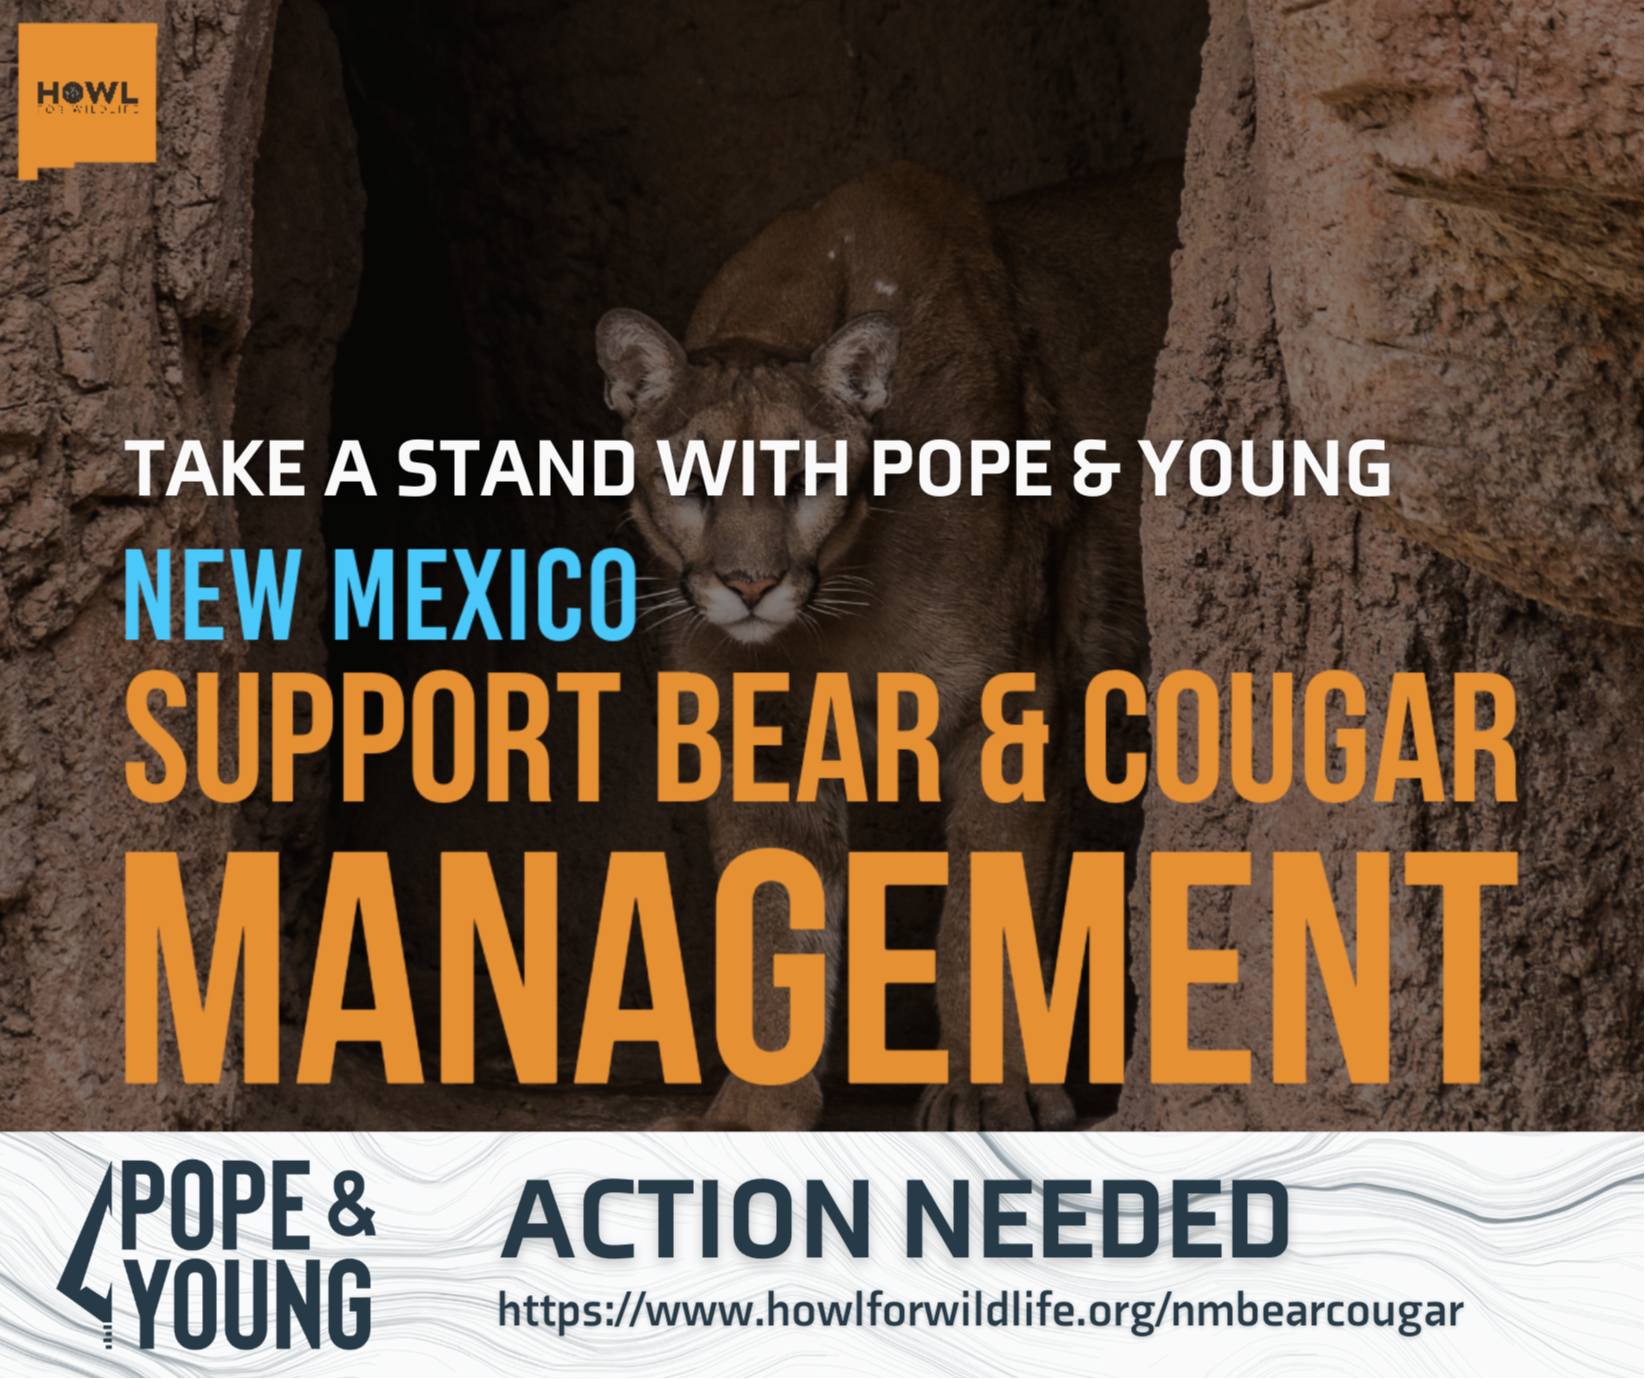 
STAND WITH POPE AND YOUNG IN NEW MEXICO